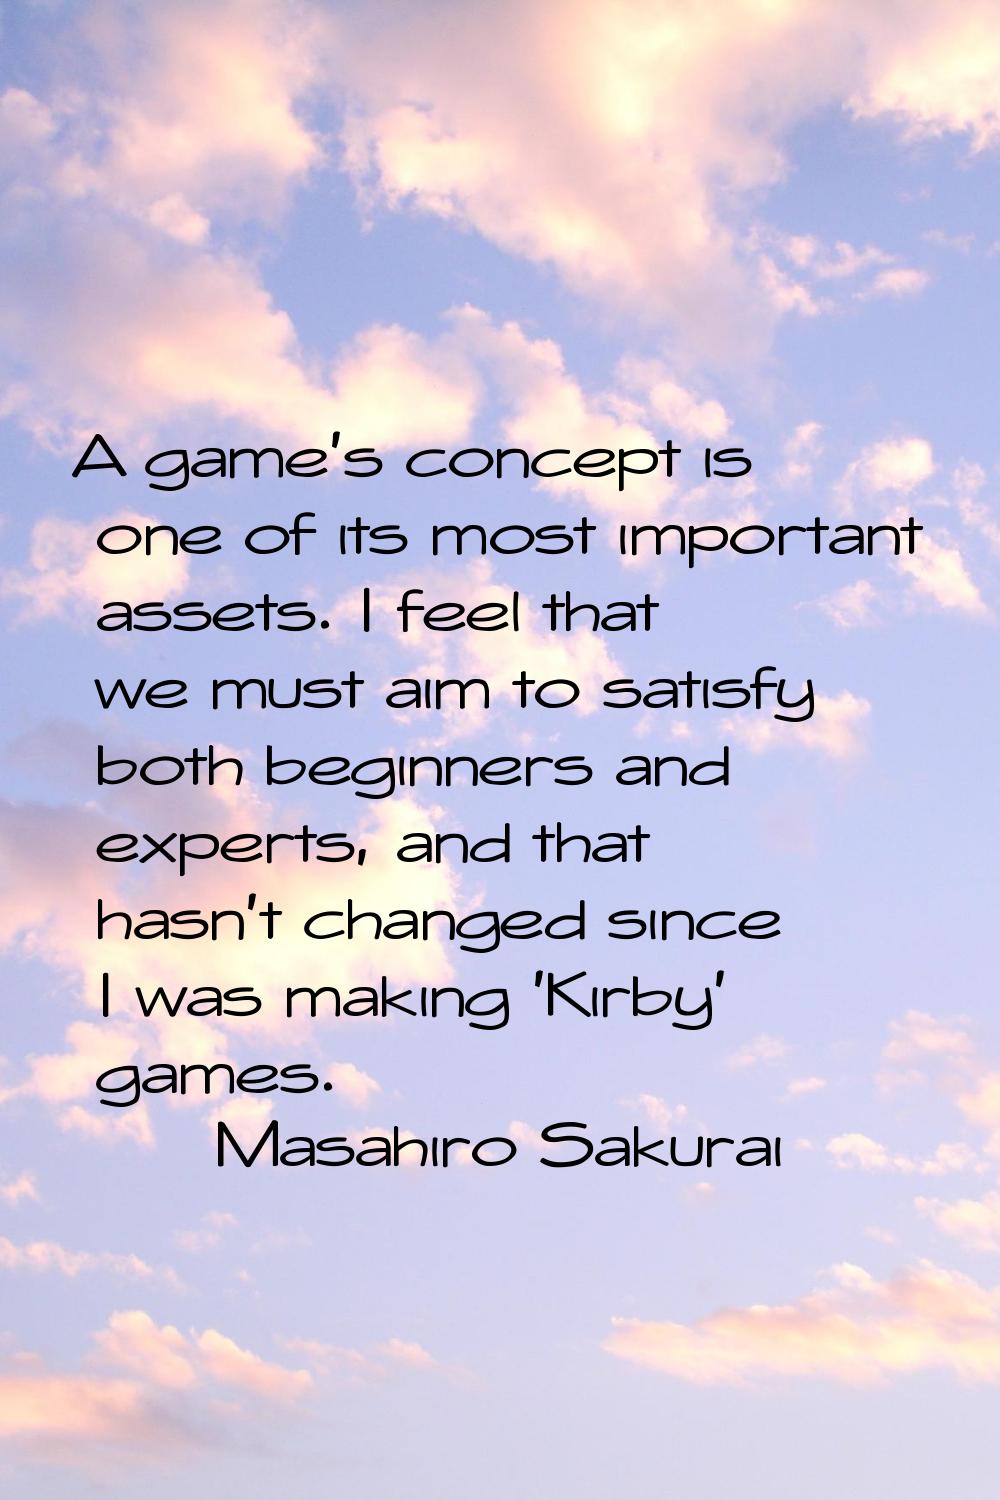 A game's concept is one of its most important assets. I feel that we must aim to satisfy both begin